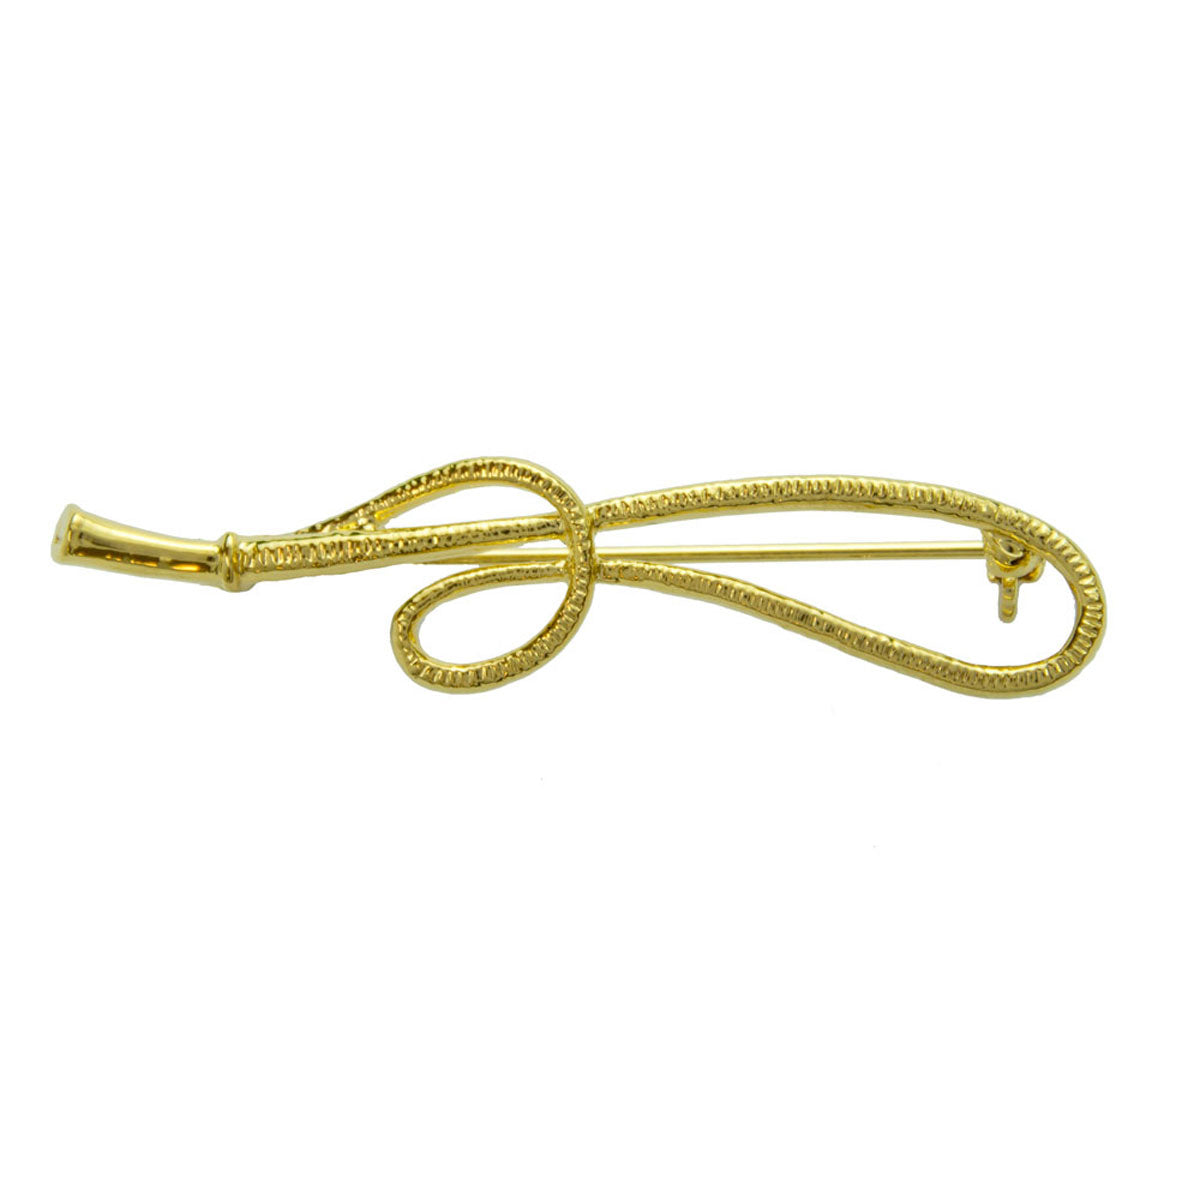 Driving Whip Stock Pin - Gold Plated